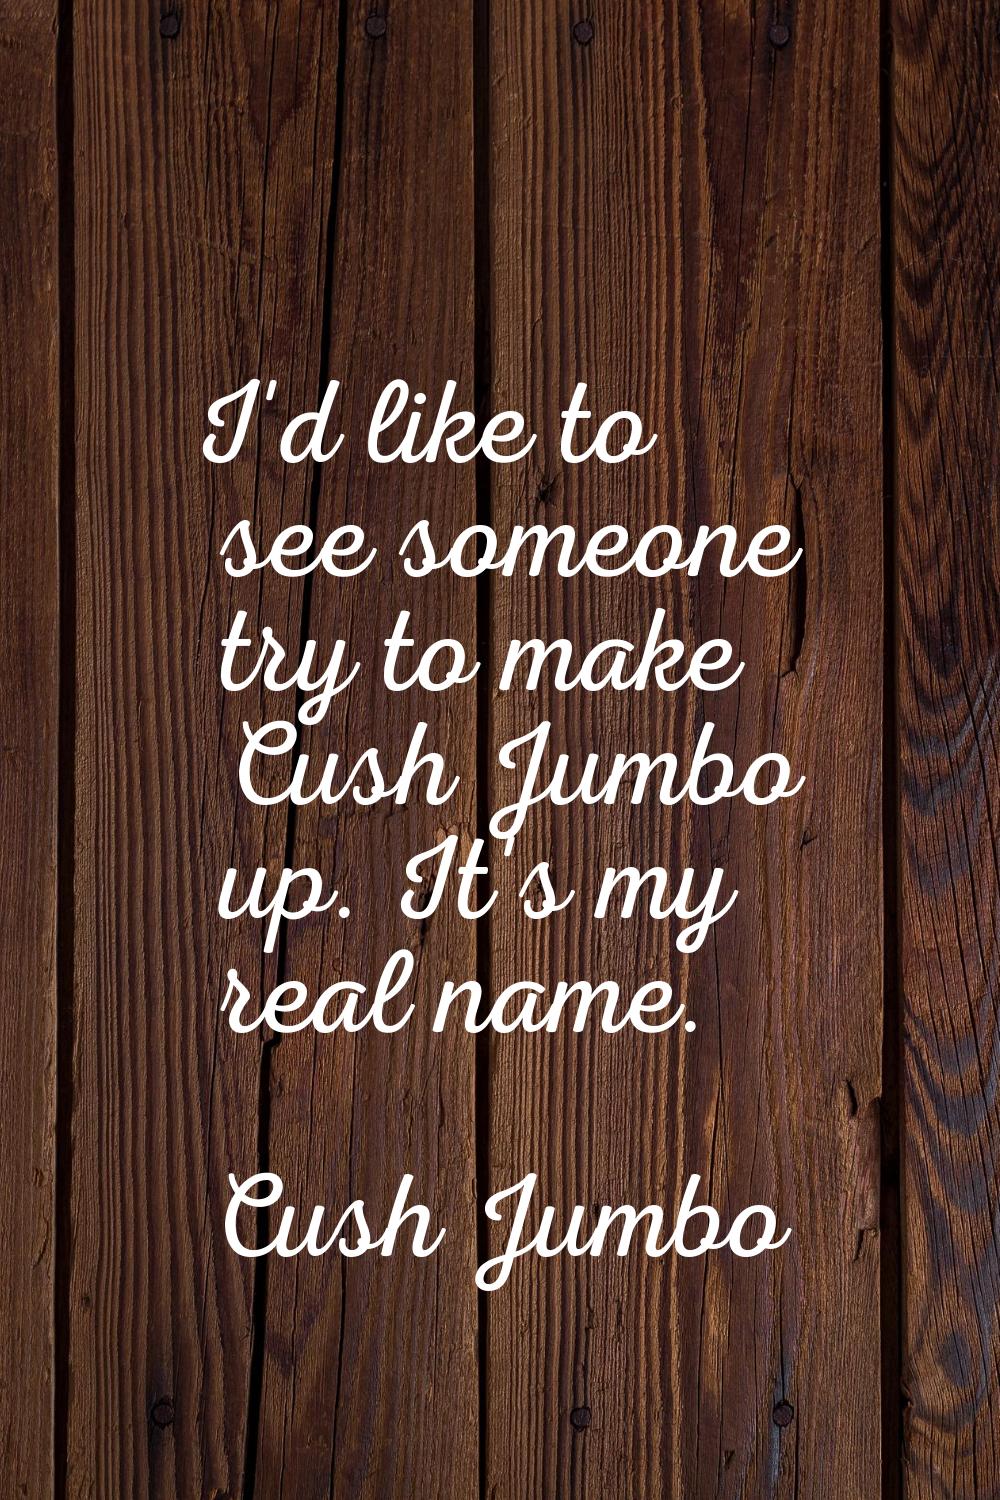 I'd like to see someone try to make Cush Jumbo up. It's my real name.